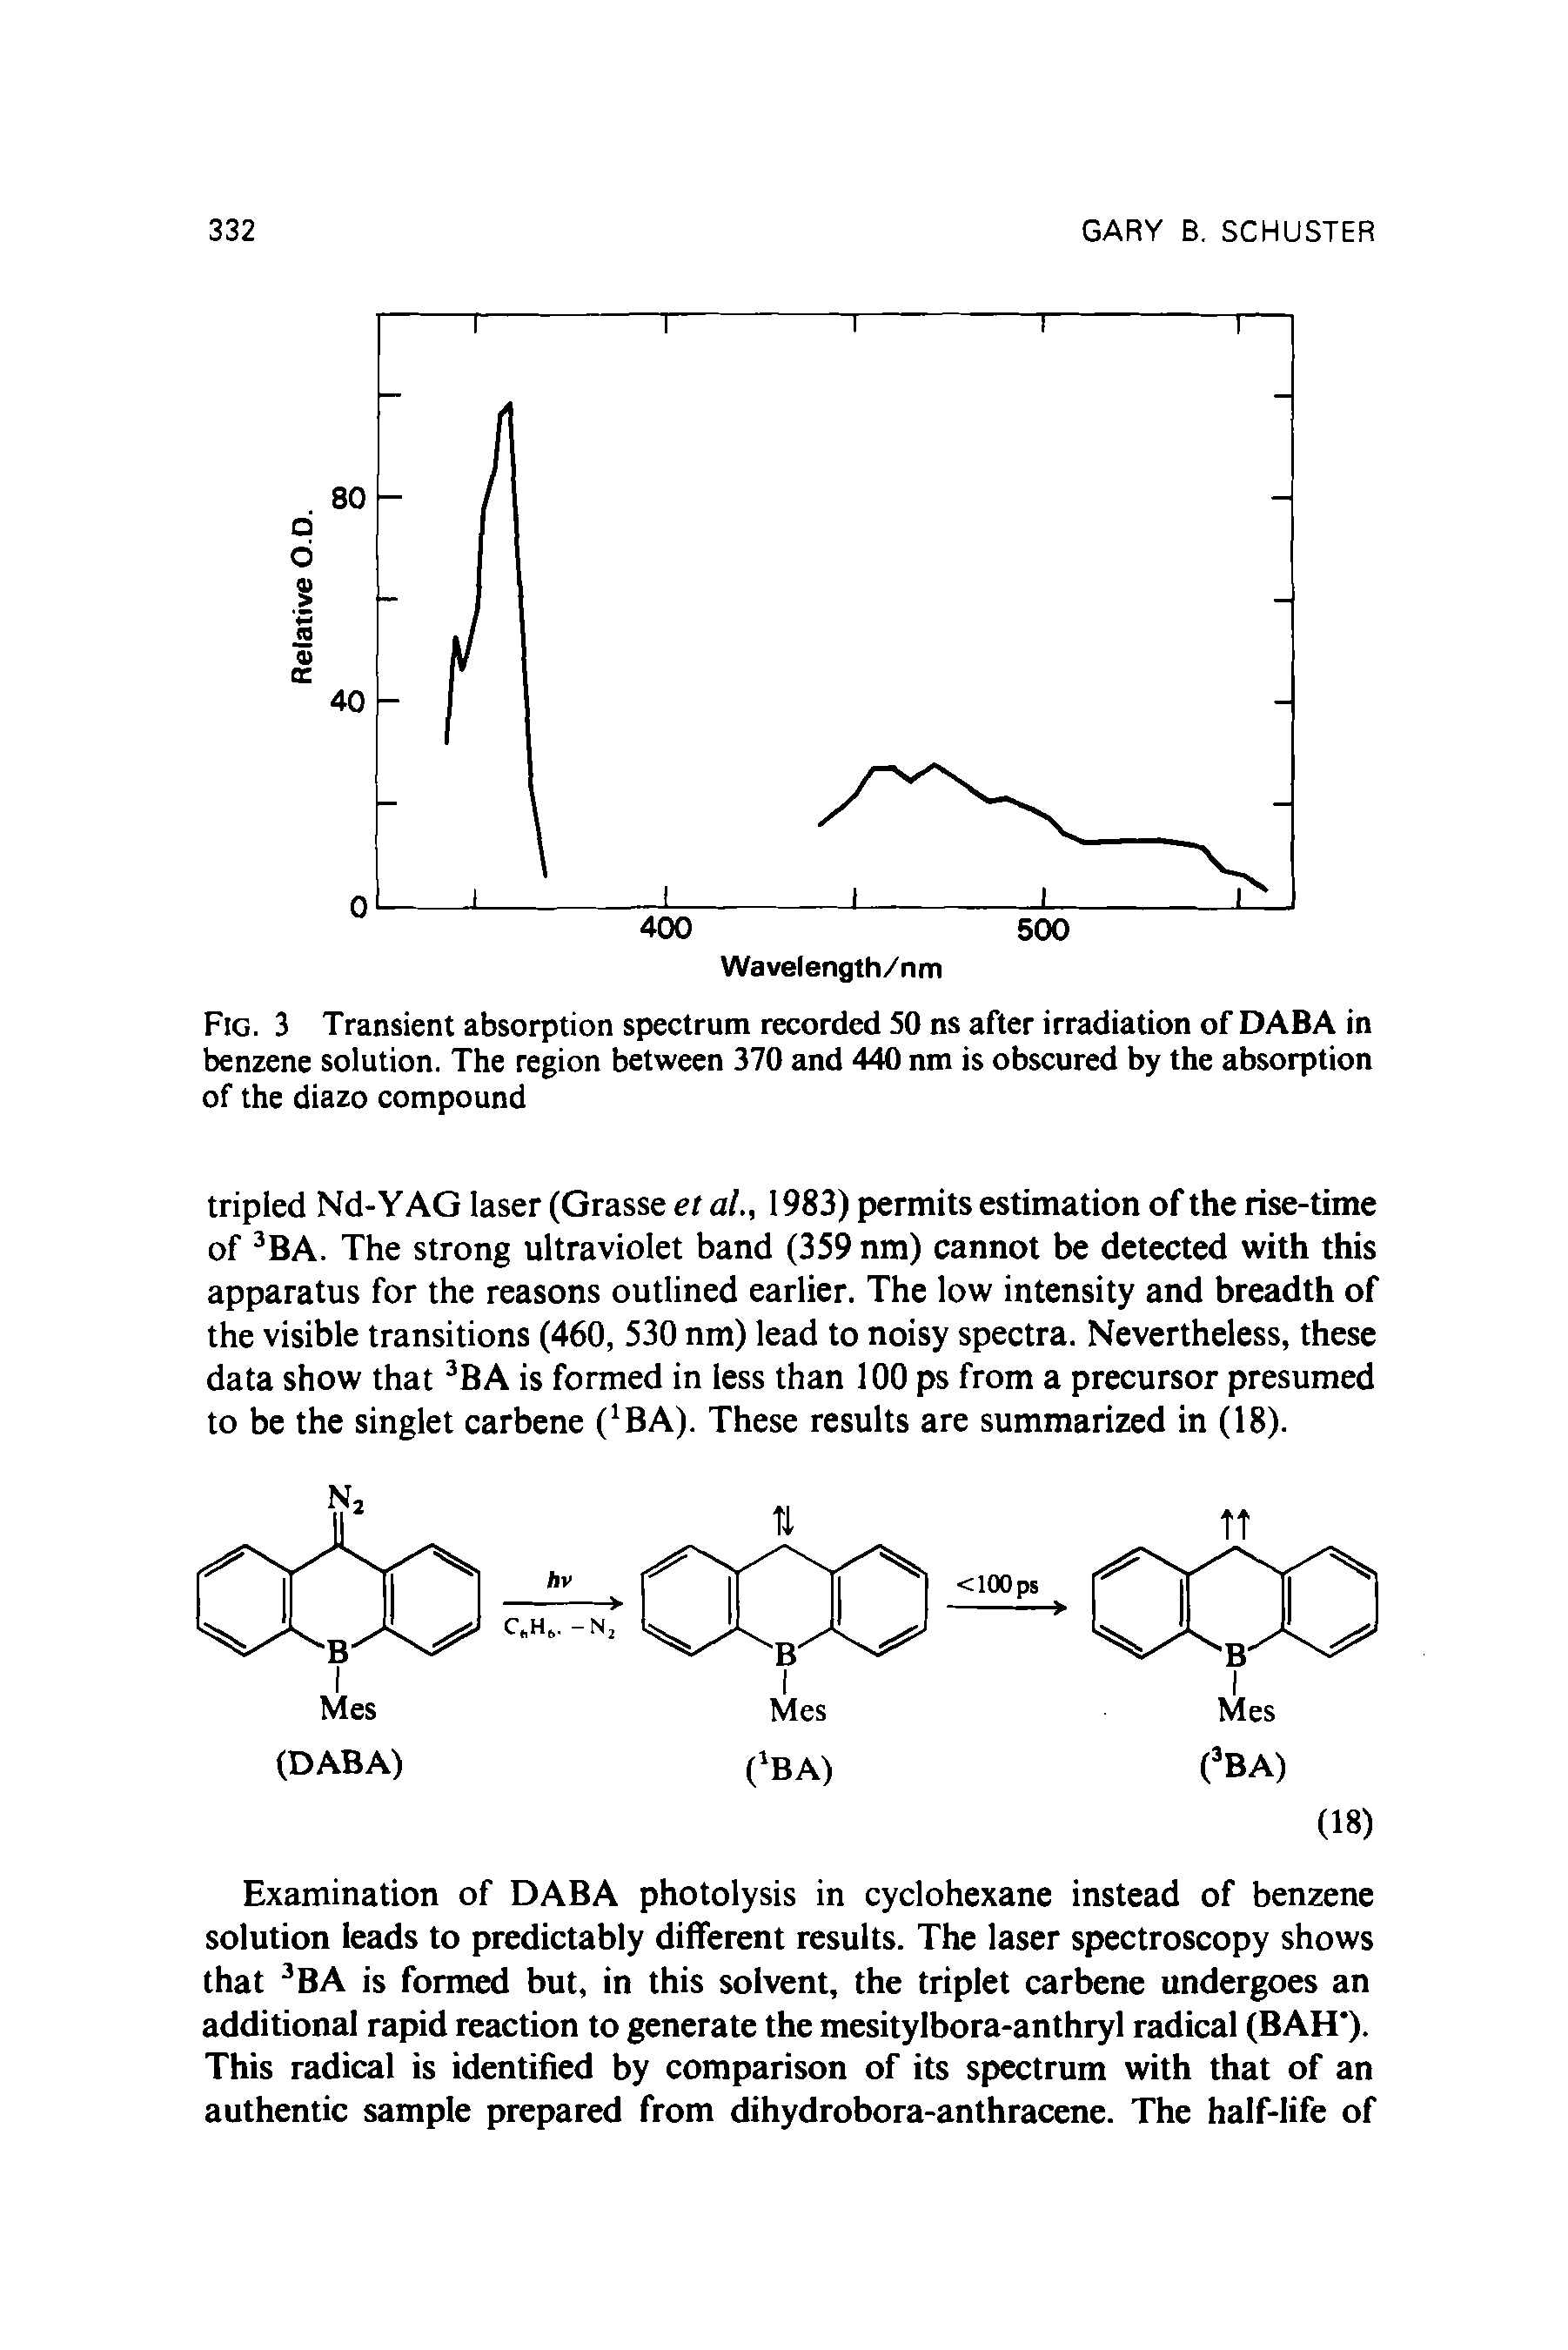 Fig. 3 Transient absorption spectrum recorded 50 ns after irradiation of DABA in benzene solution. The region between 370 and 440 nm is obscured by the absorption of the diazo compound...